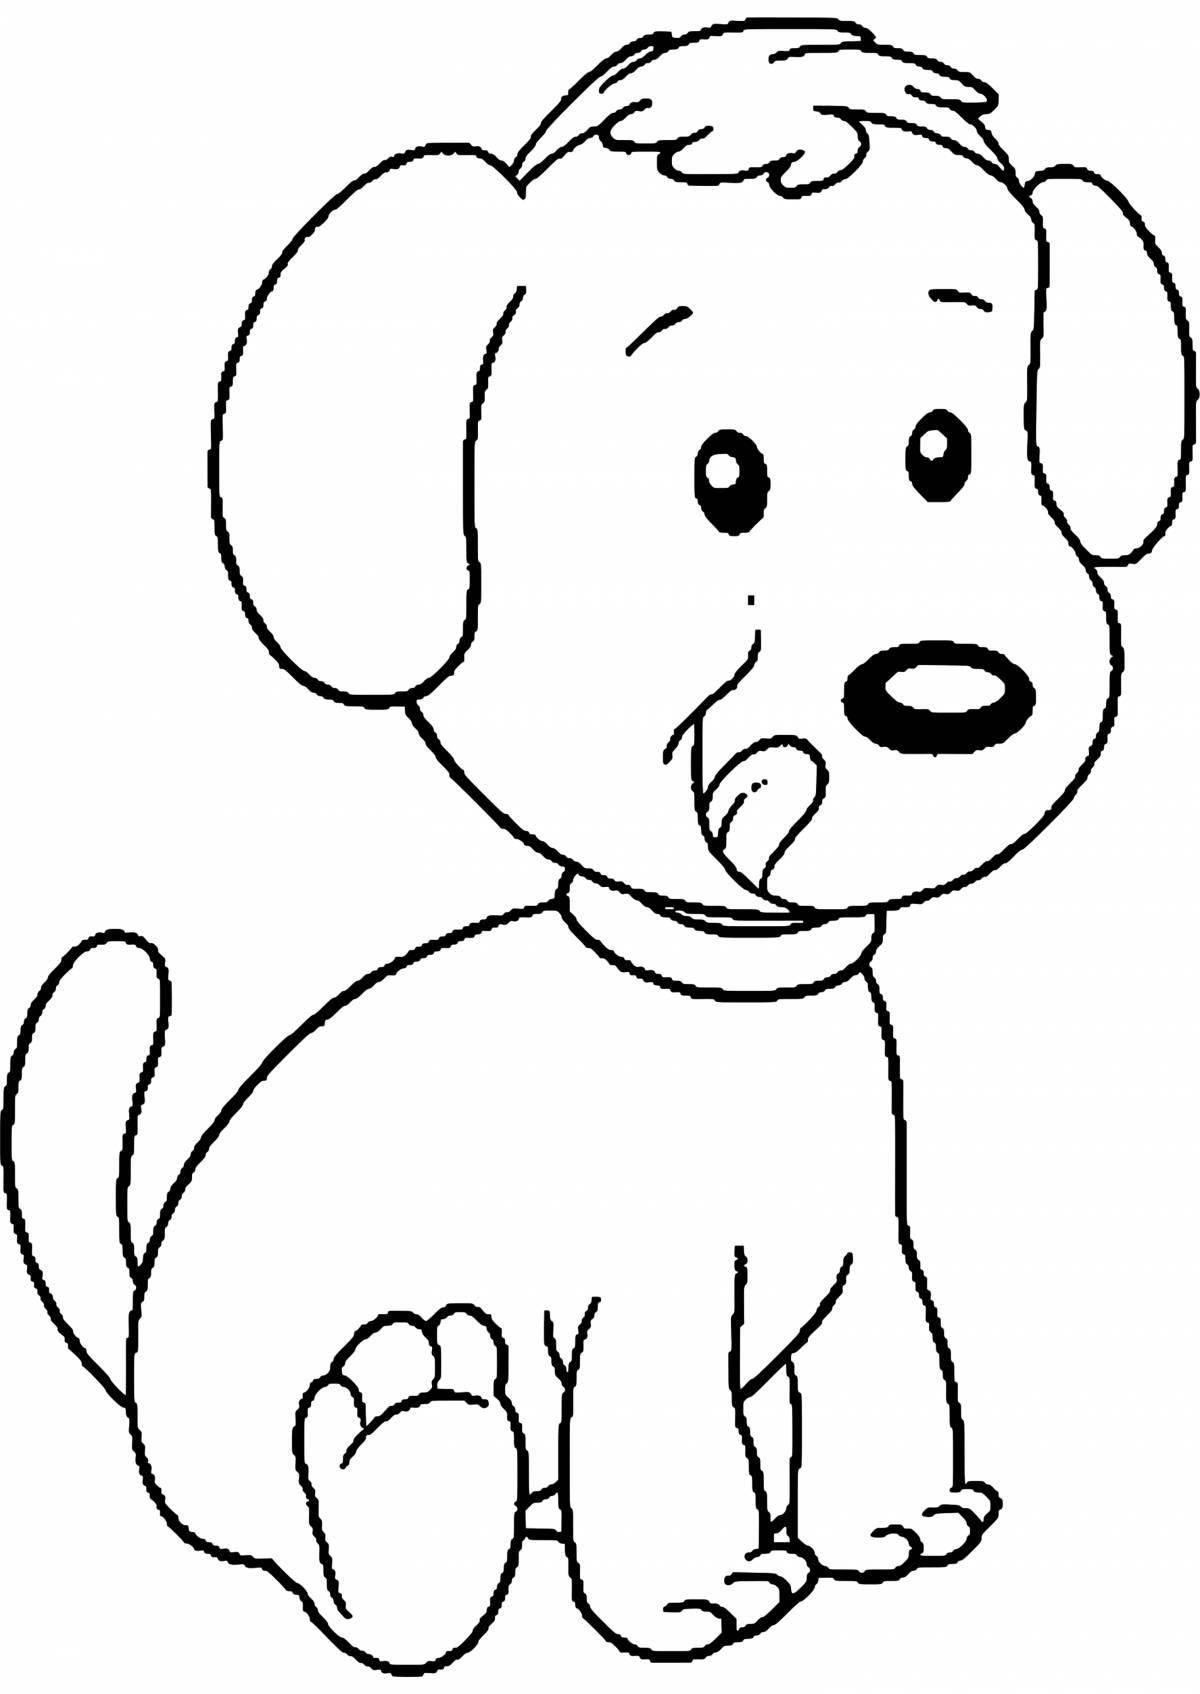 Coloring book with a dog for children 2-3 years old